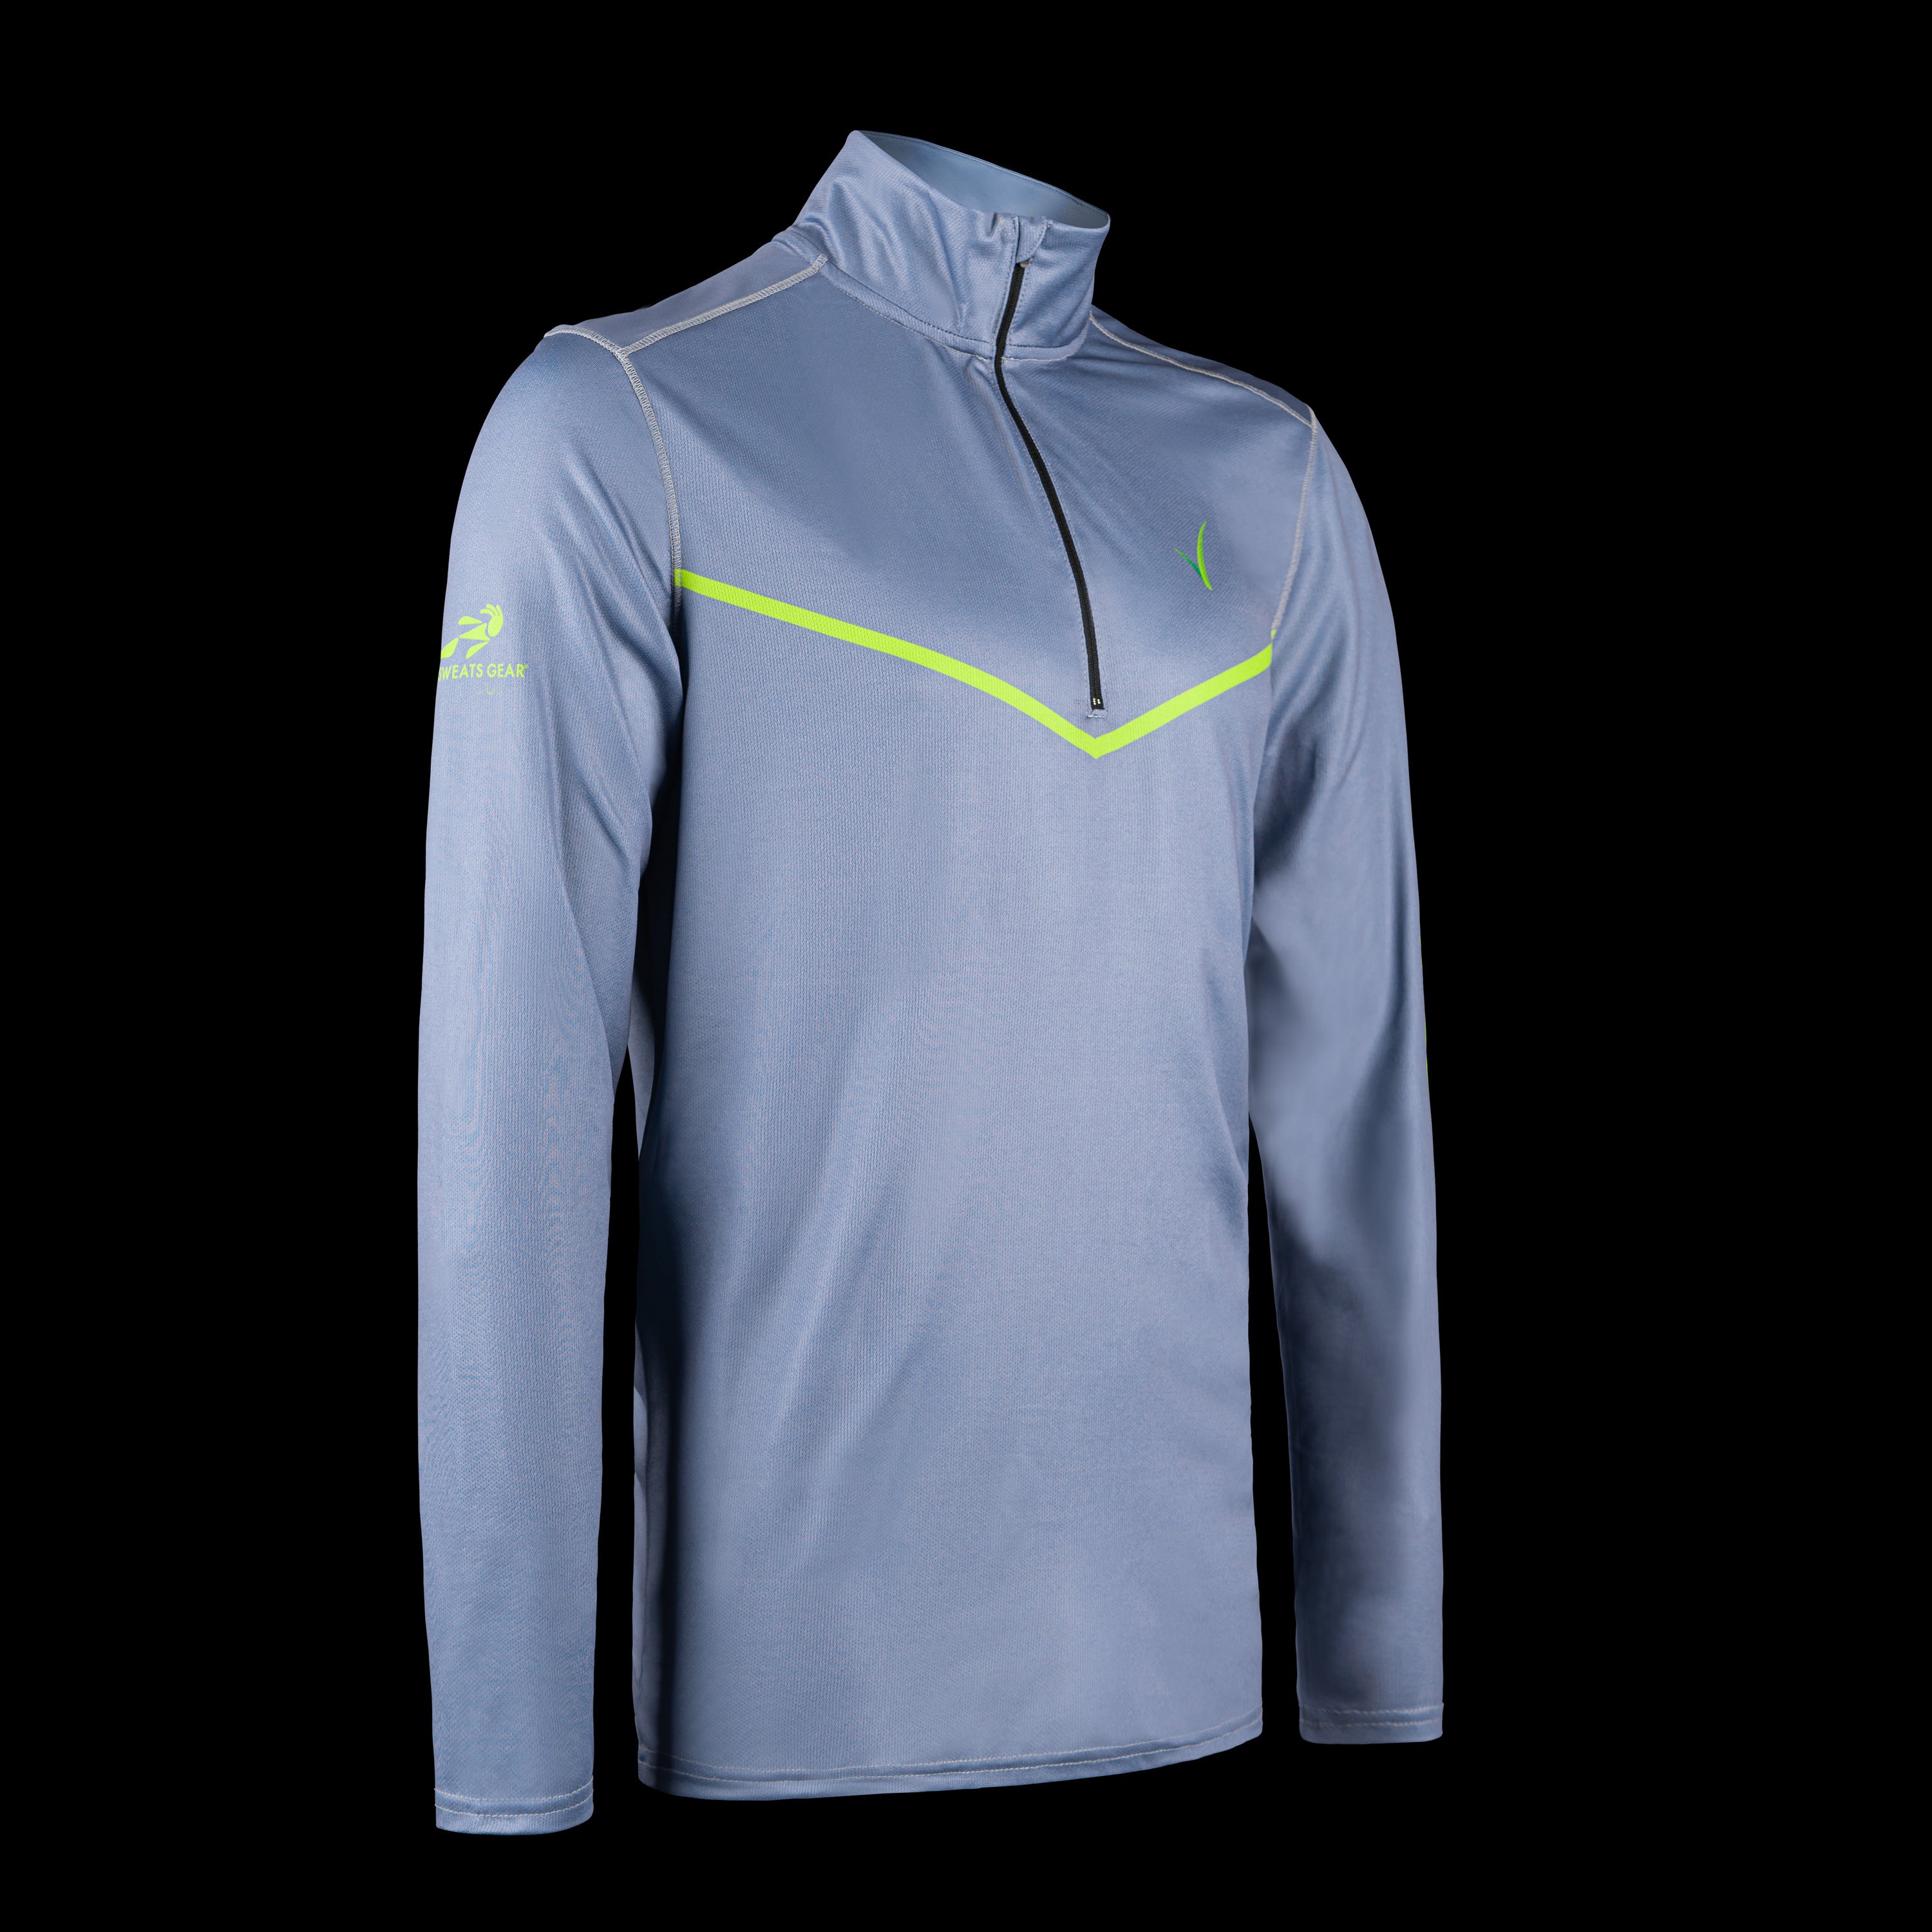 Repreve pullover grey side view